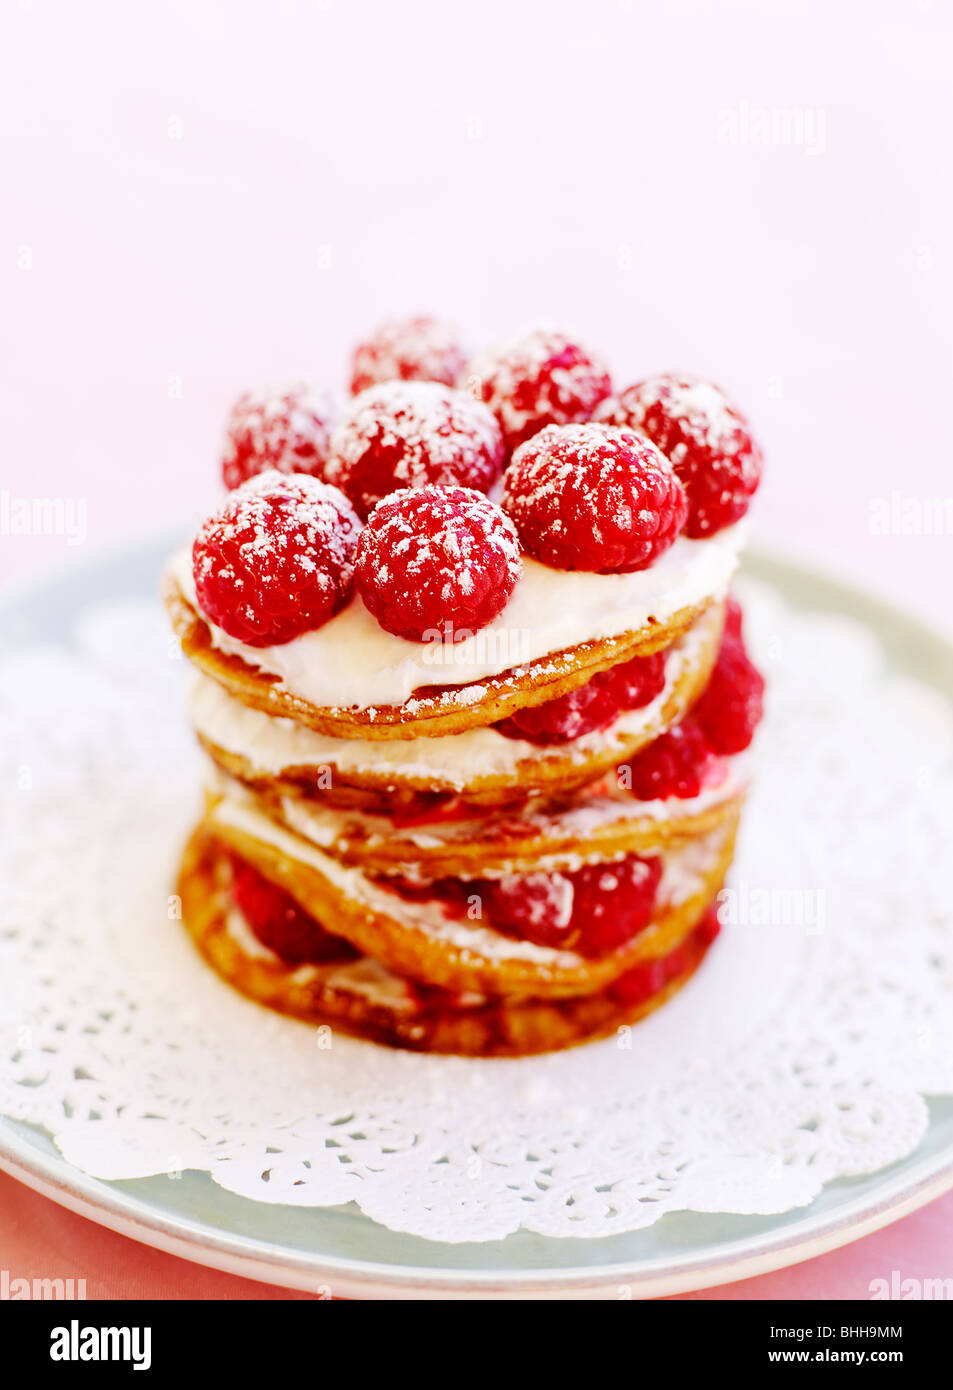 Pancake pastry with raspberries, Sweden. Stock Photo